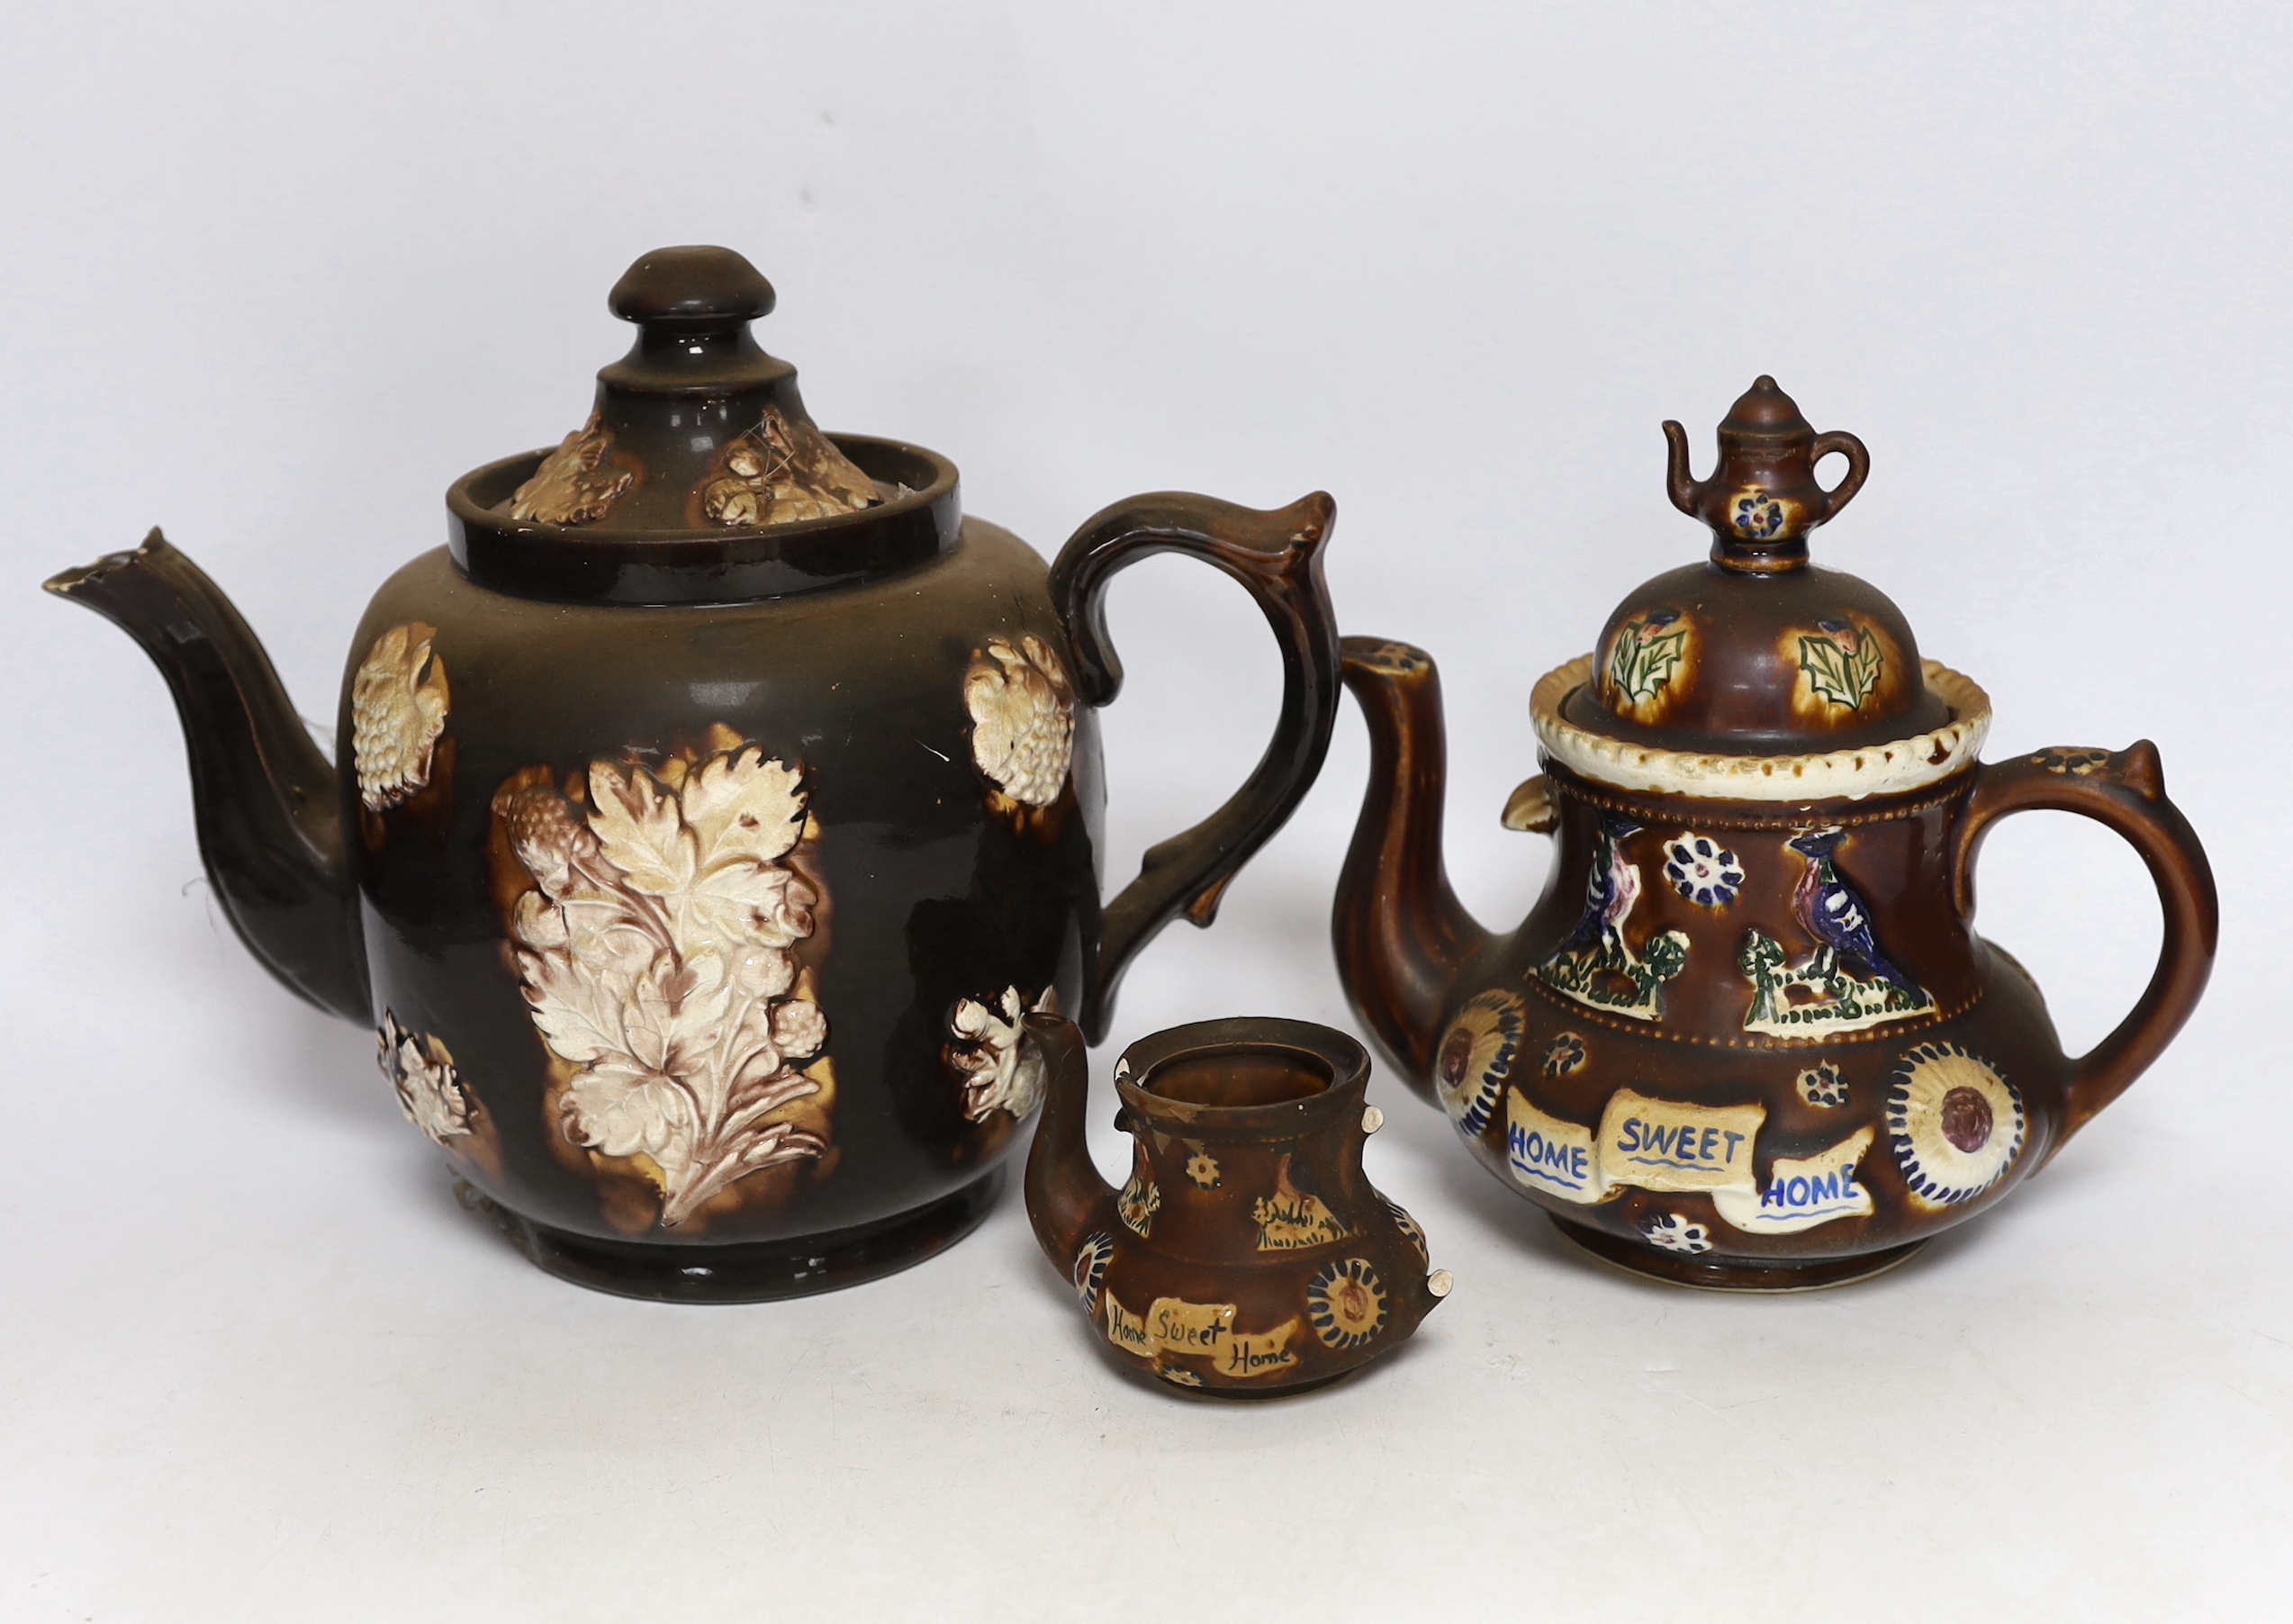 Three 19th century various sized Measham Barge ware teapots, largest 22cm high